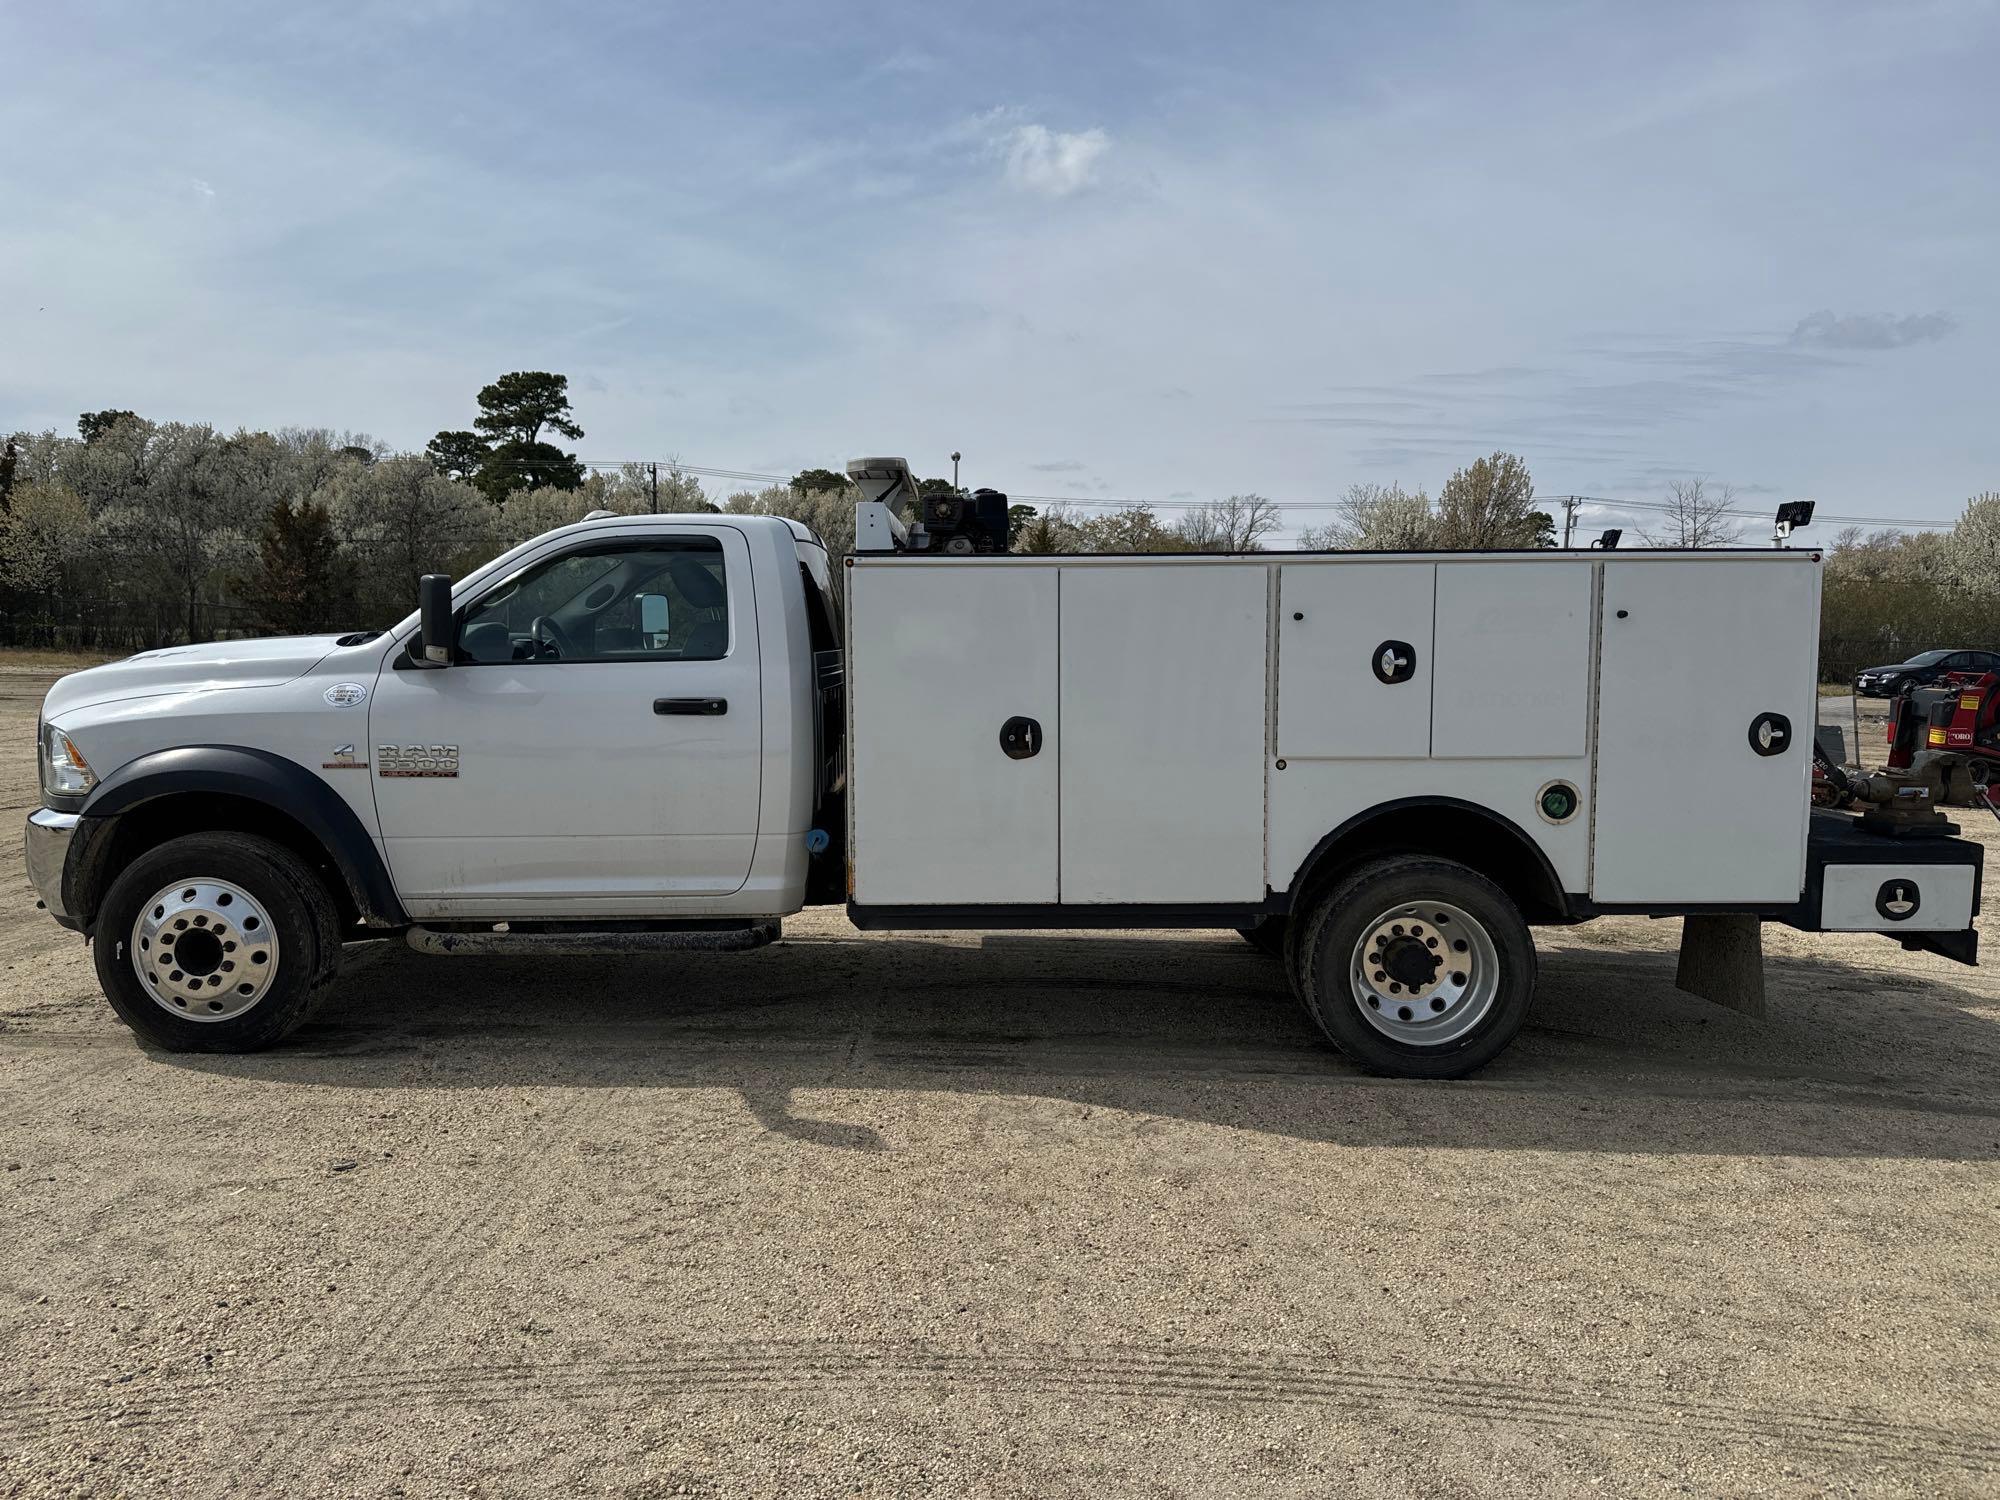 2018 DODGE RAM 5500 SERVICE TRUCK VN:3C7WRNBL5JG320399 4x4, powered by diesel engine, equipped with